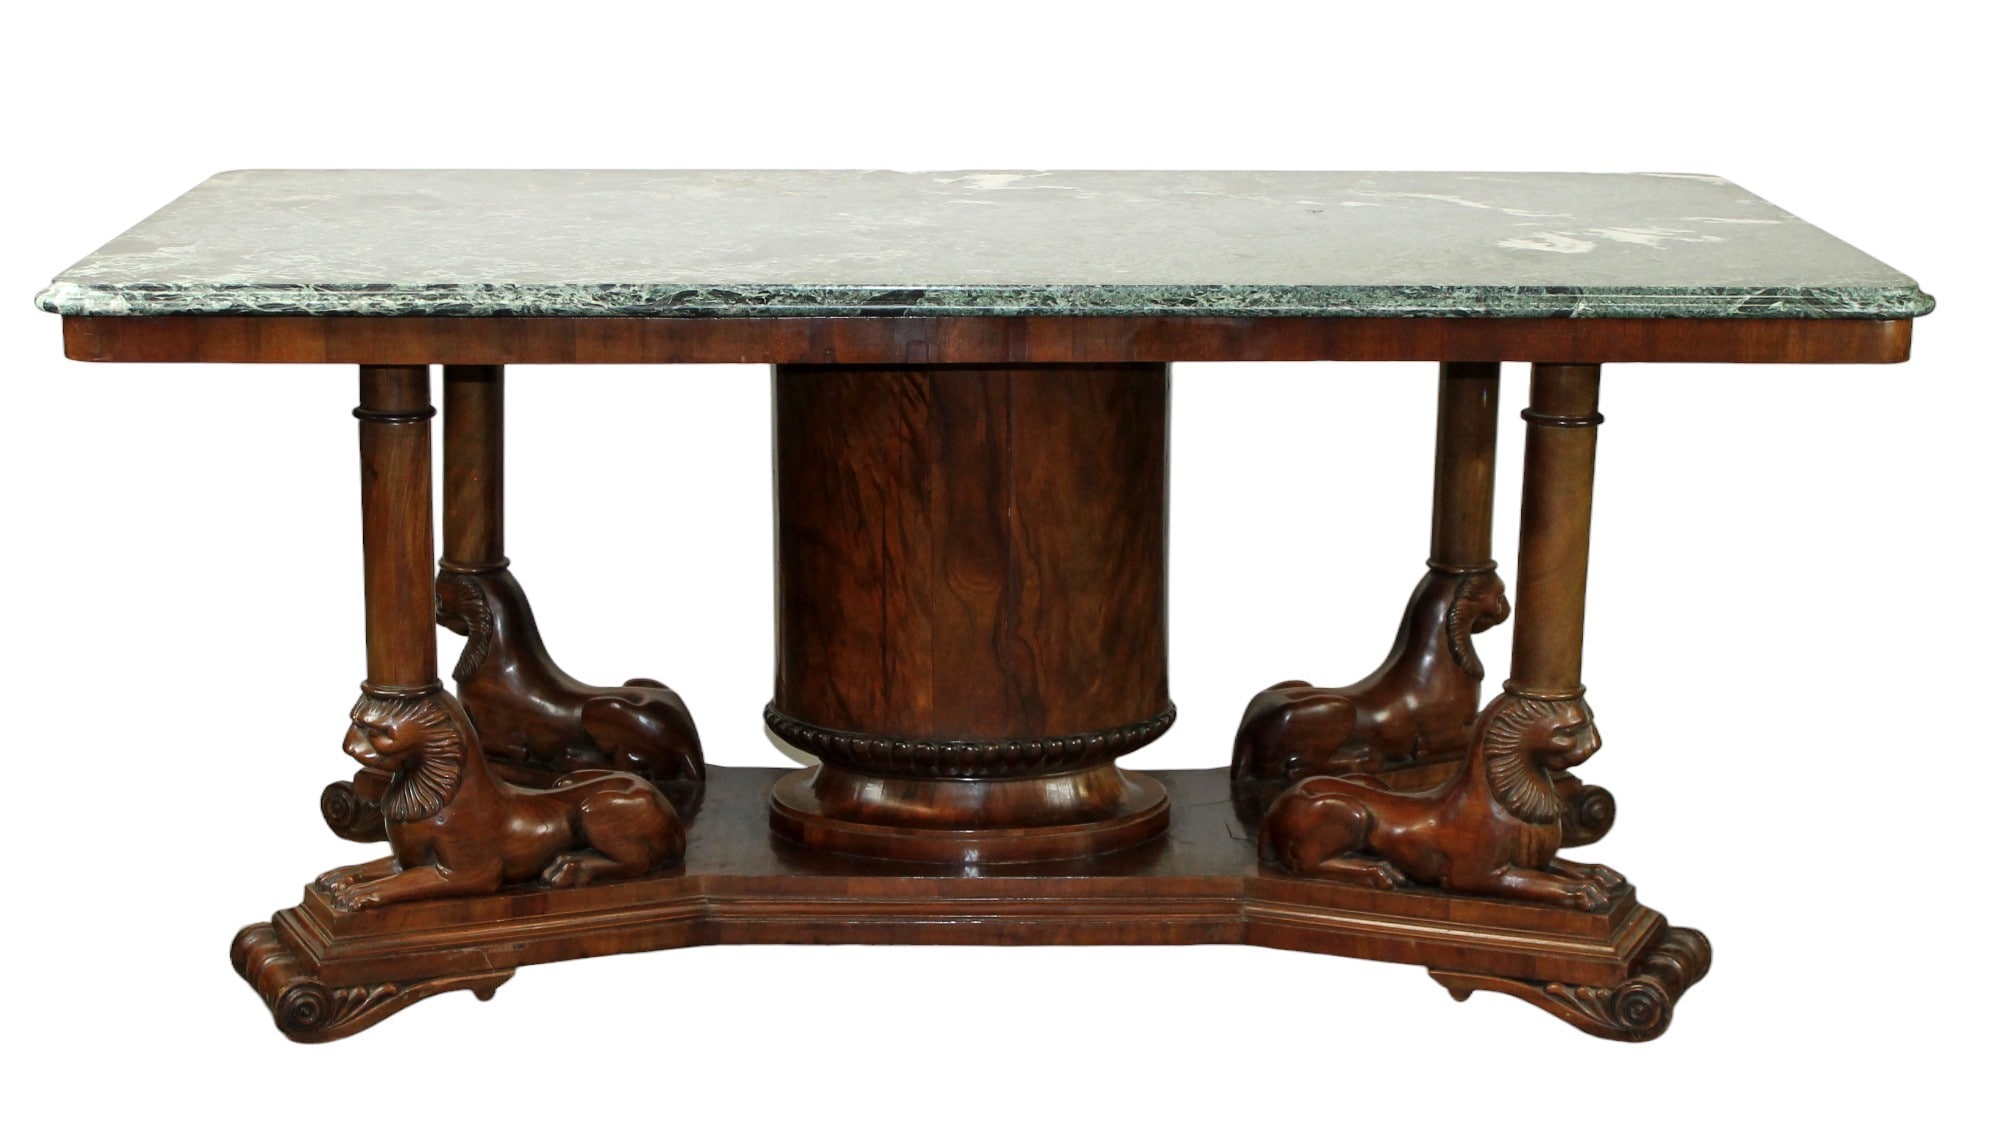 French Empire mabrle top library table with figural lion base